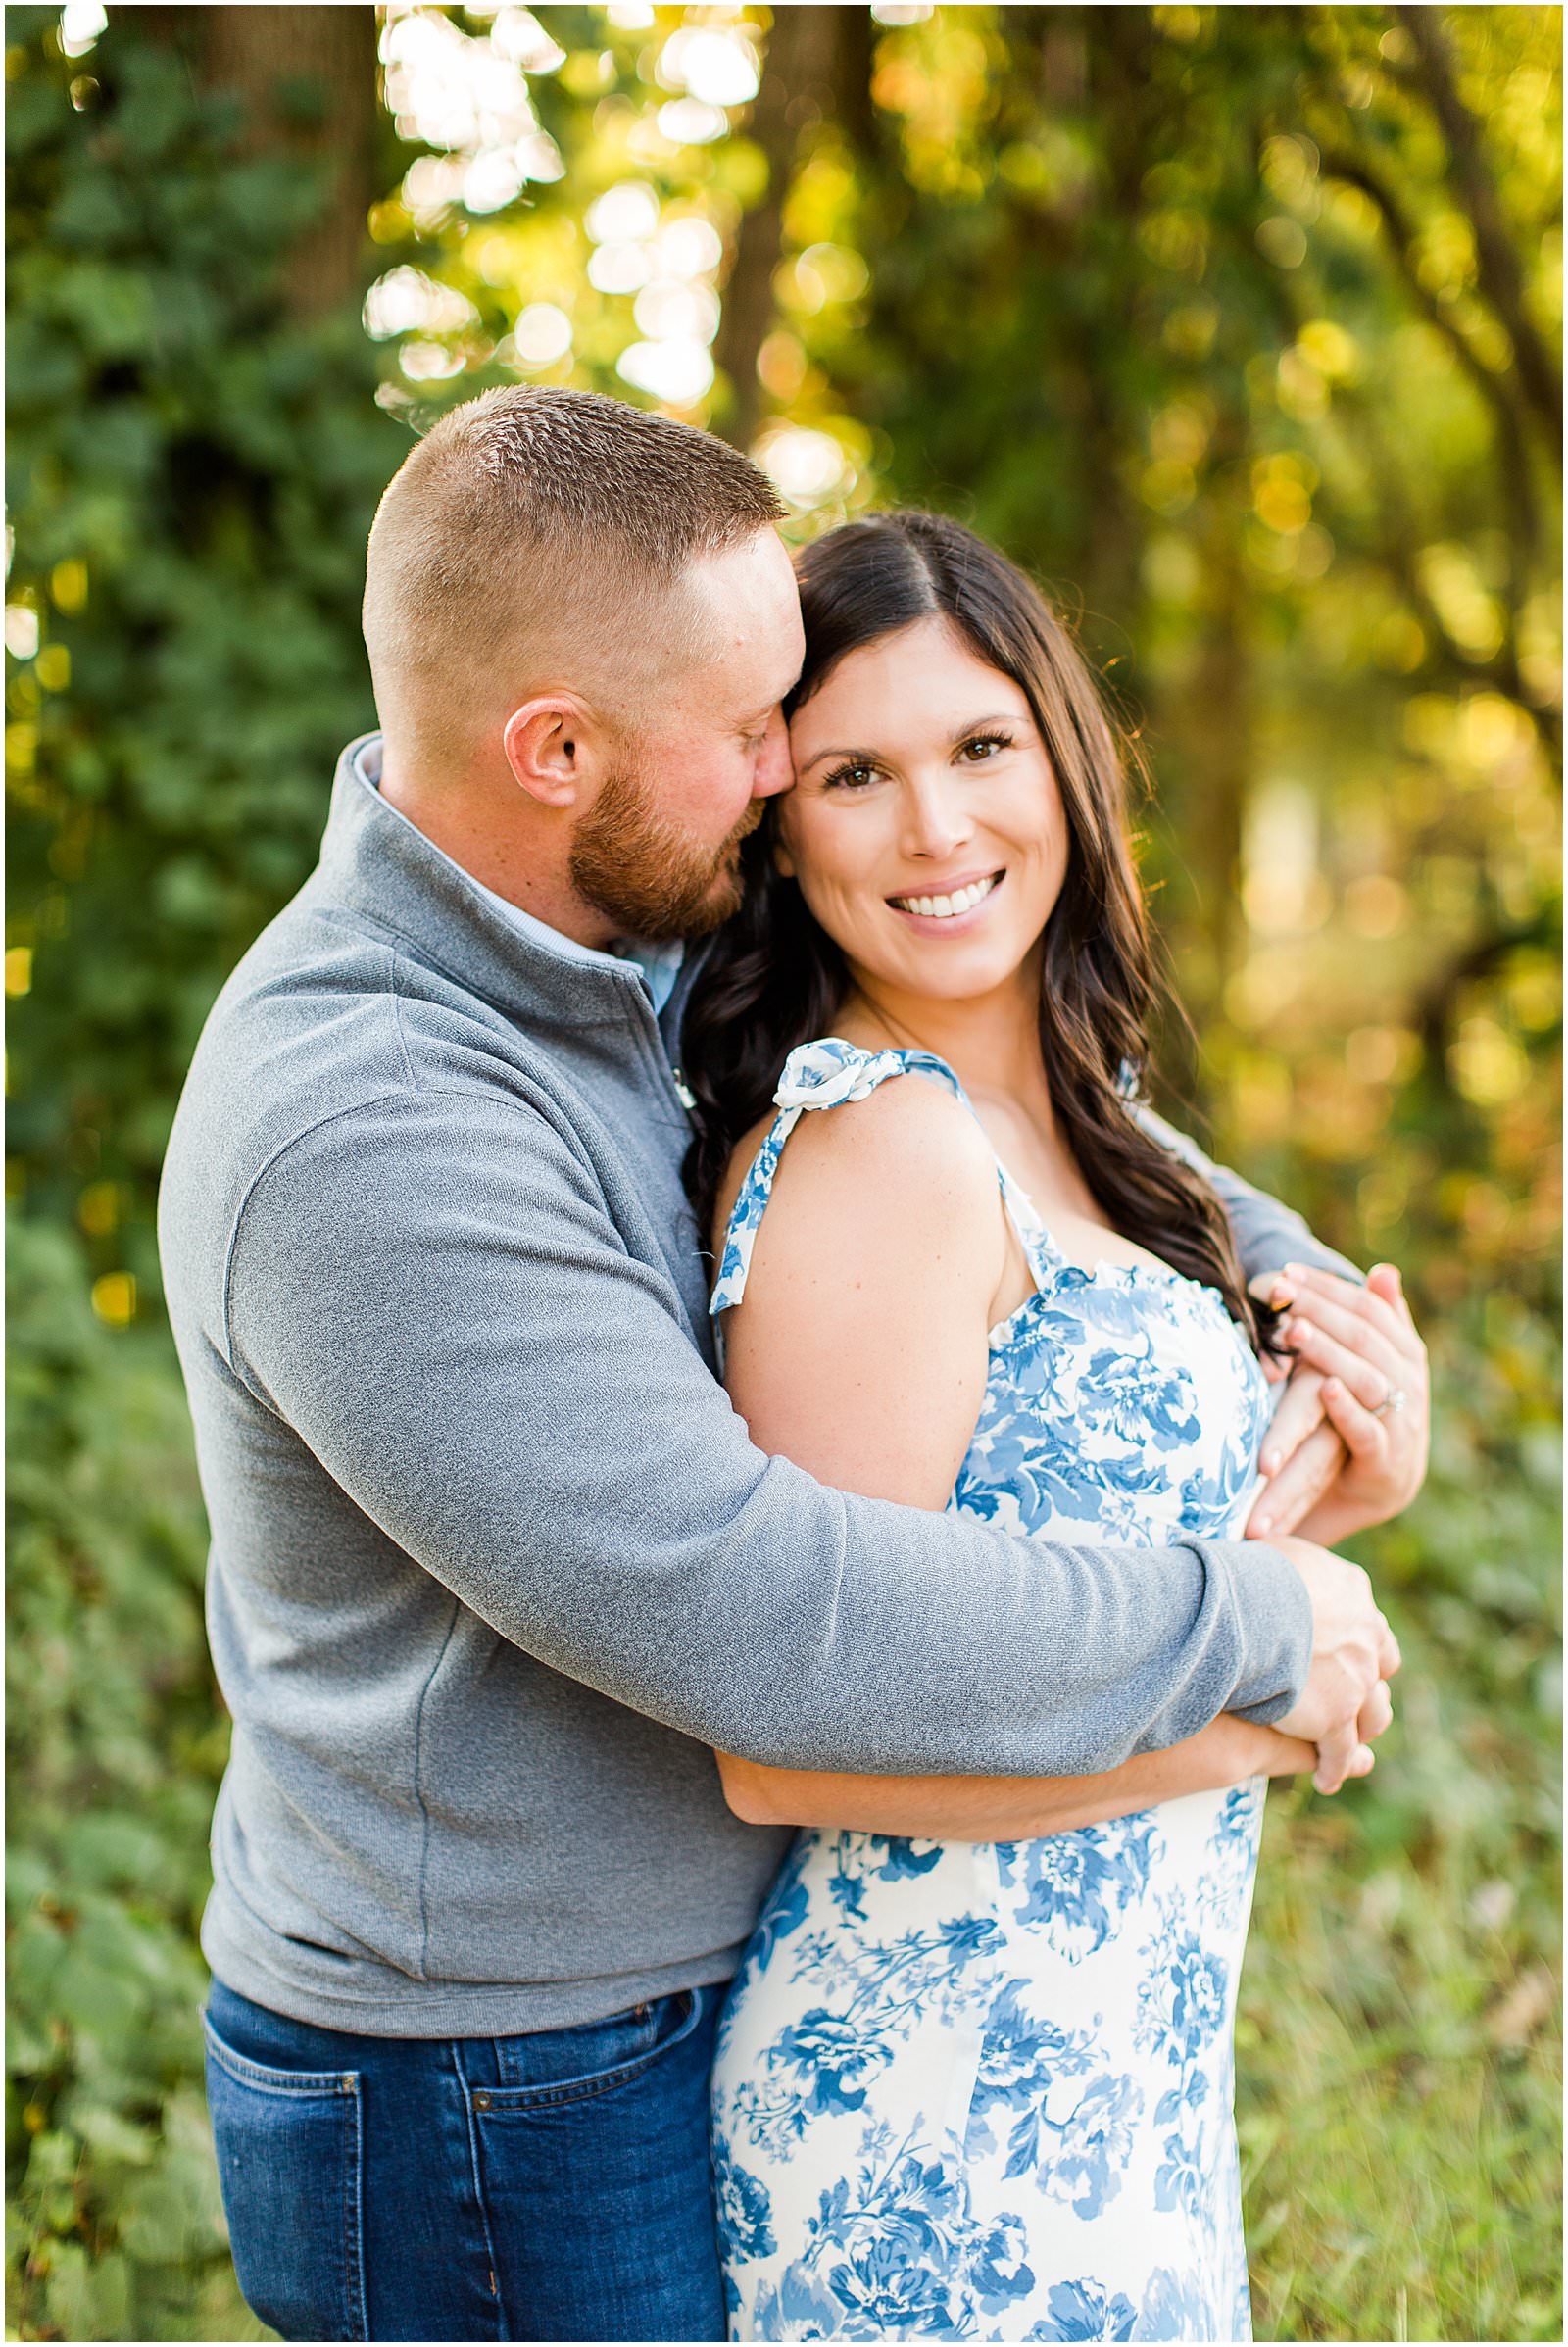 A Rolling Hills Country Club Engagement Session | Meagan and Kyle | Bret and Brandie Photography 0025.jpg